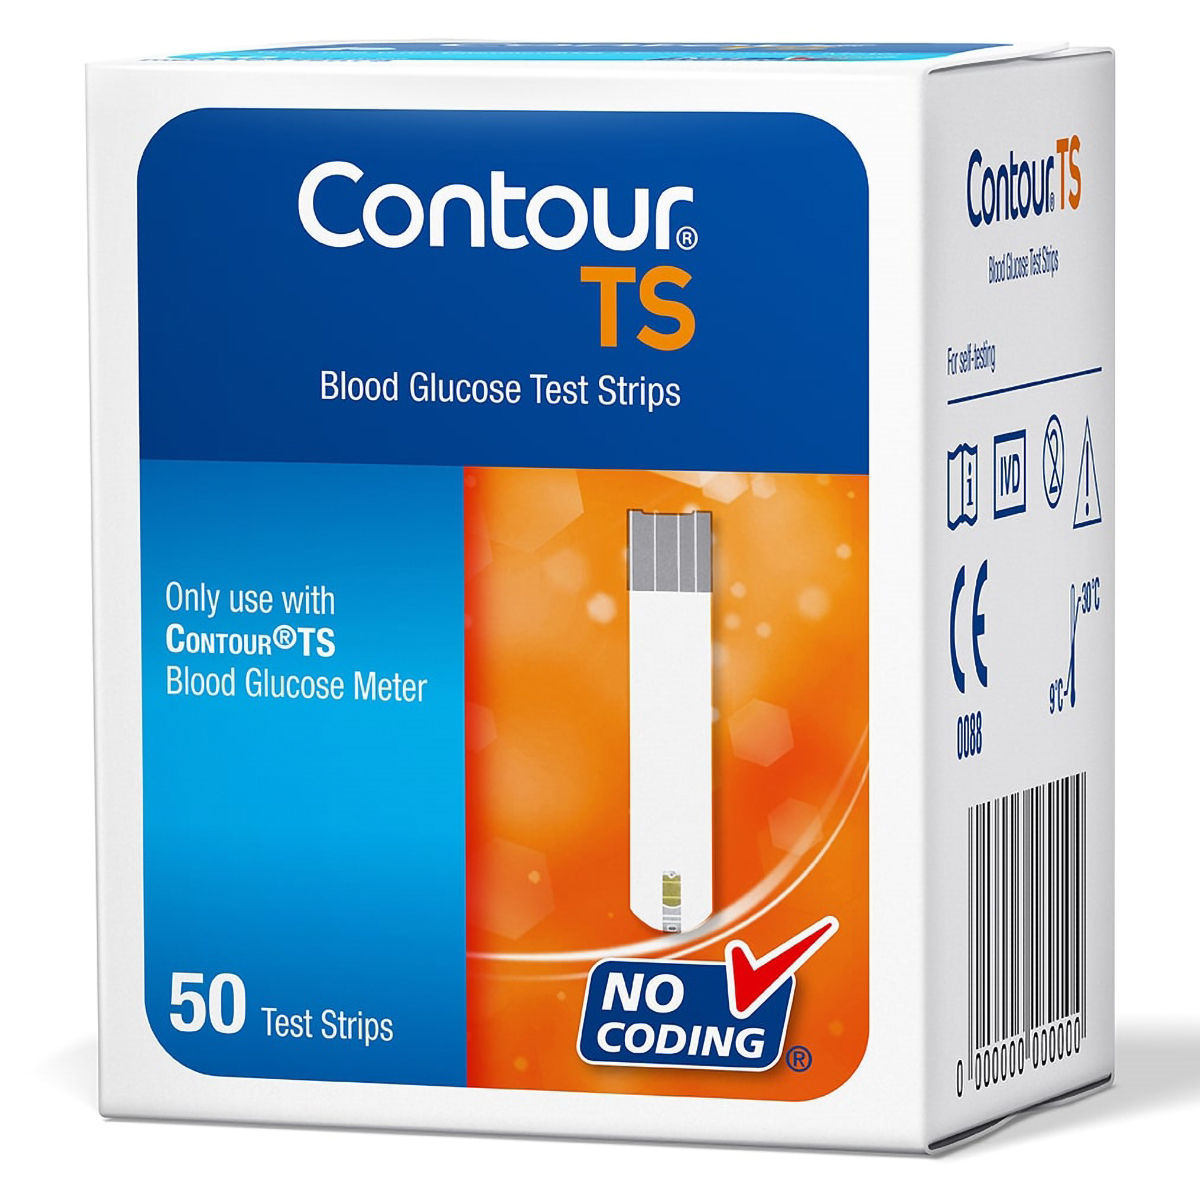 Buy Contour TS Blood Glucose Test Strips, 50 Count Online